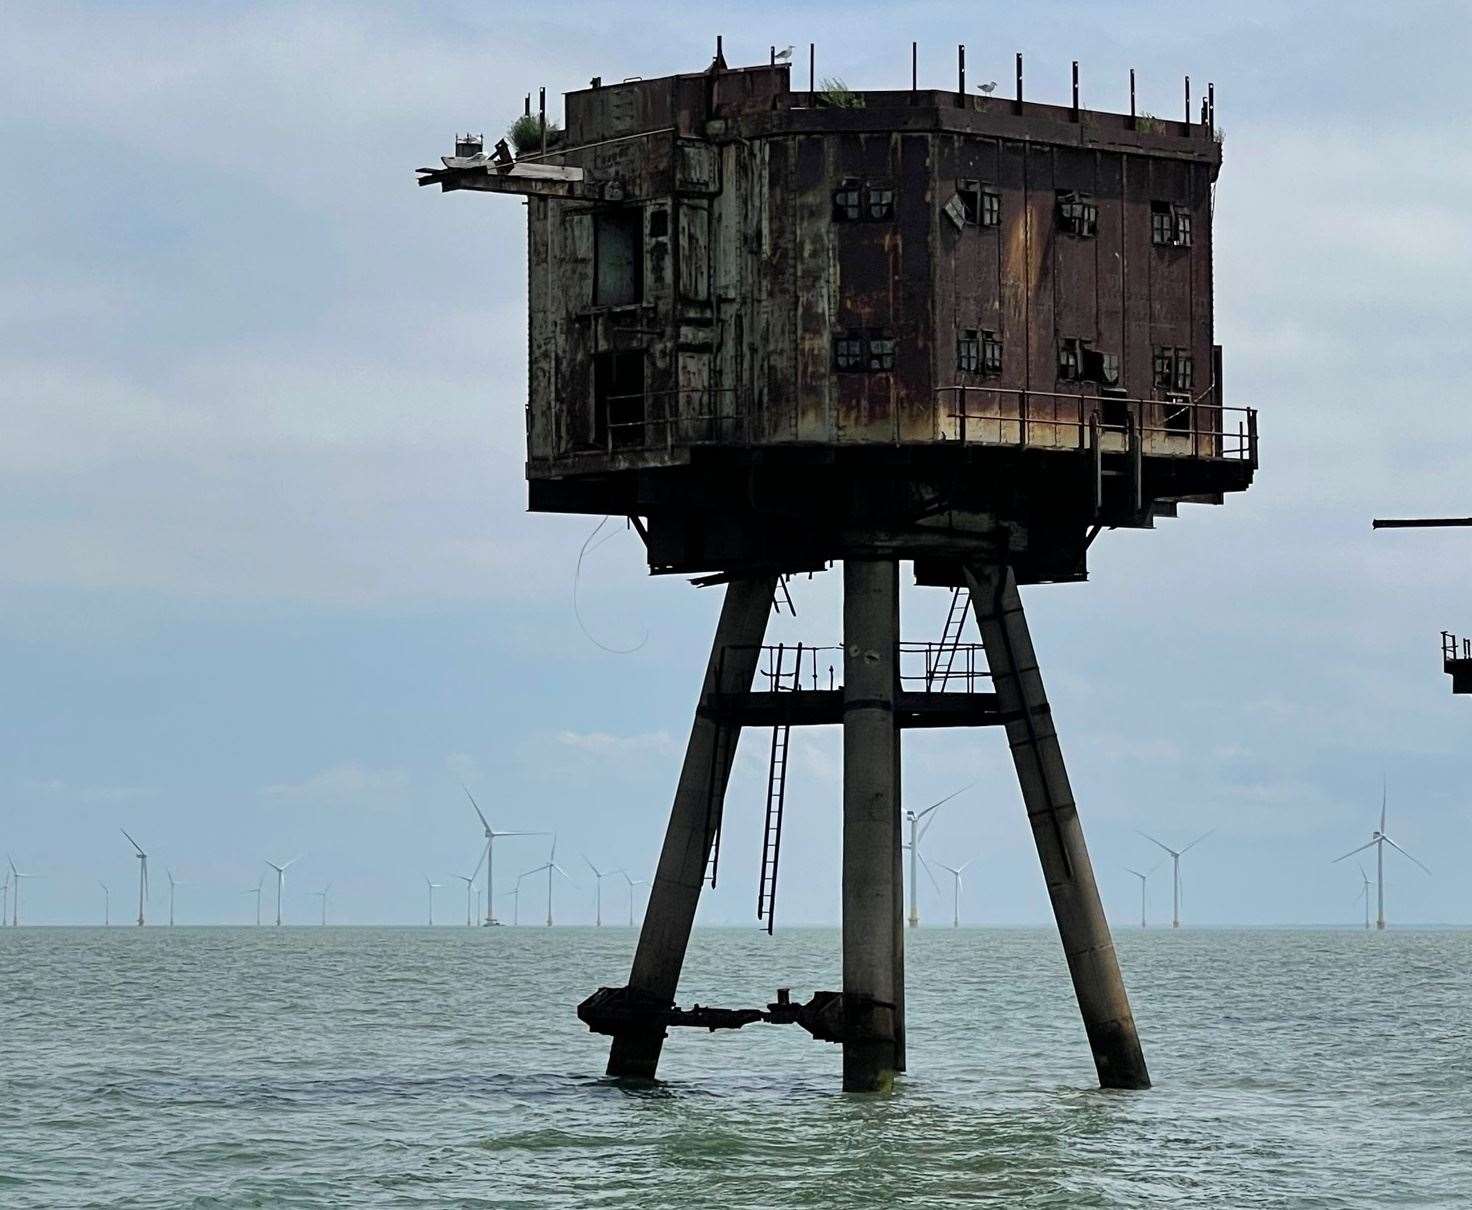 Since being decommissioned in 1958, they have been left in a state of disrepair. Picture: Margaret Flo McEwan